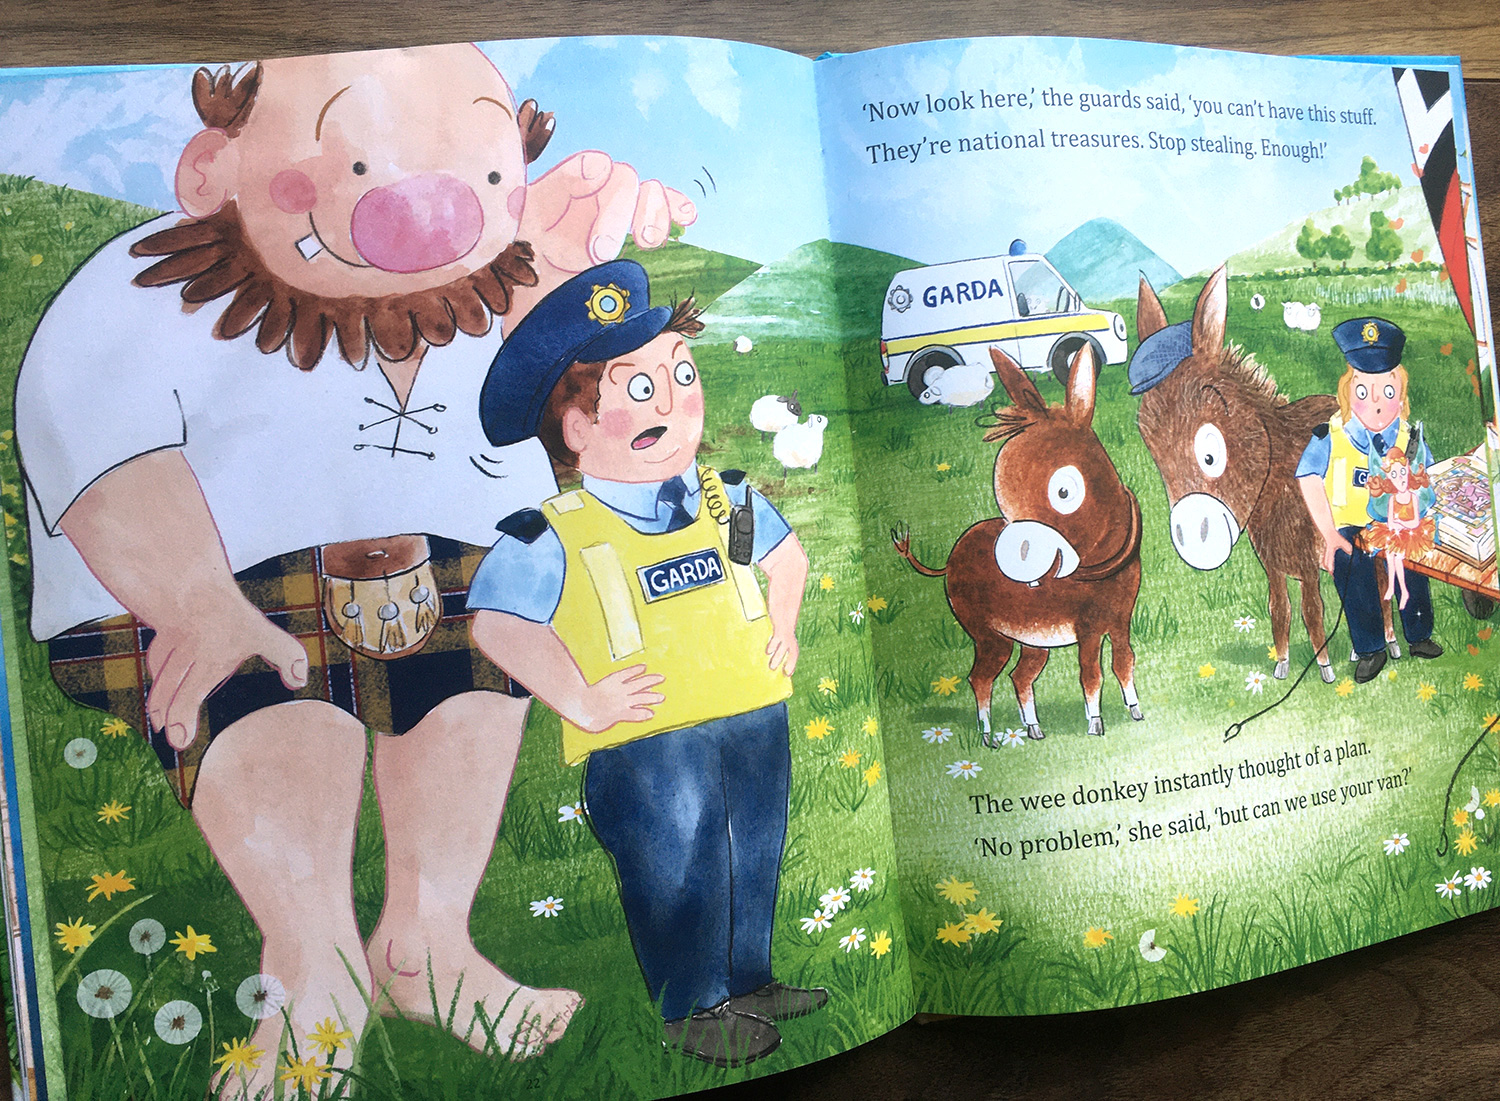 Wee Donkey's Treasure Hunt, the garda is not happy with wee donkey